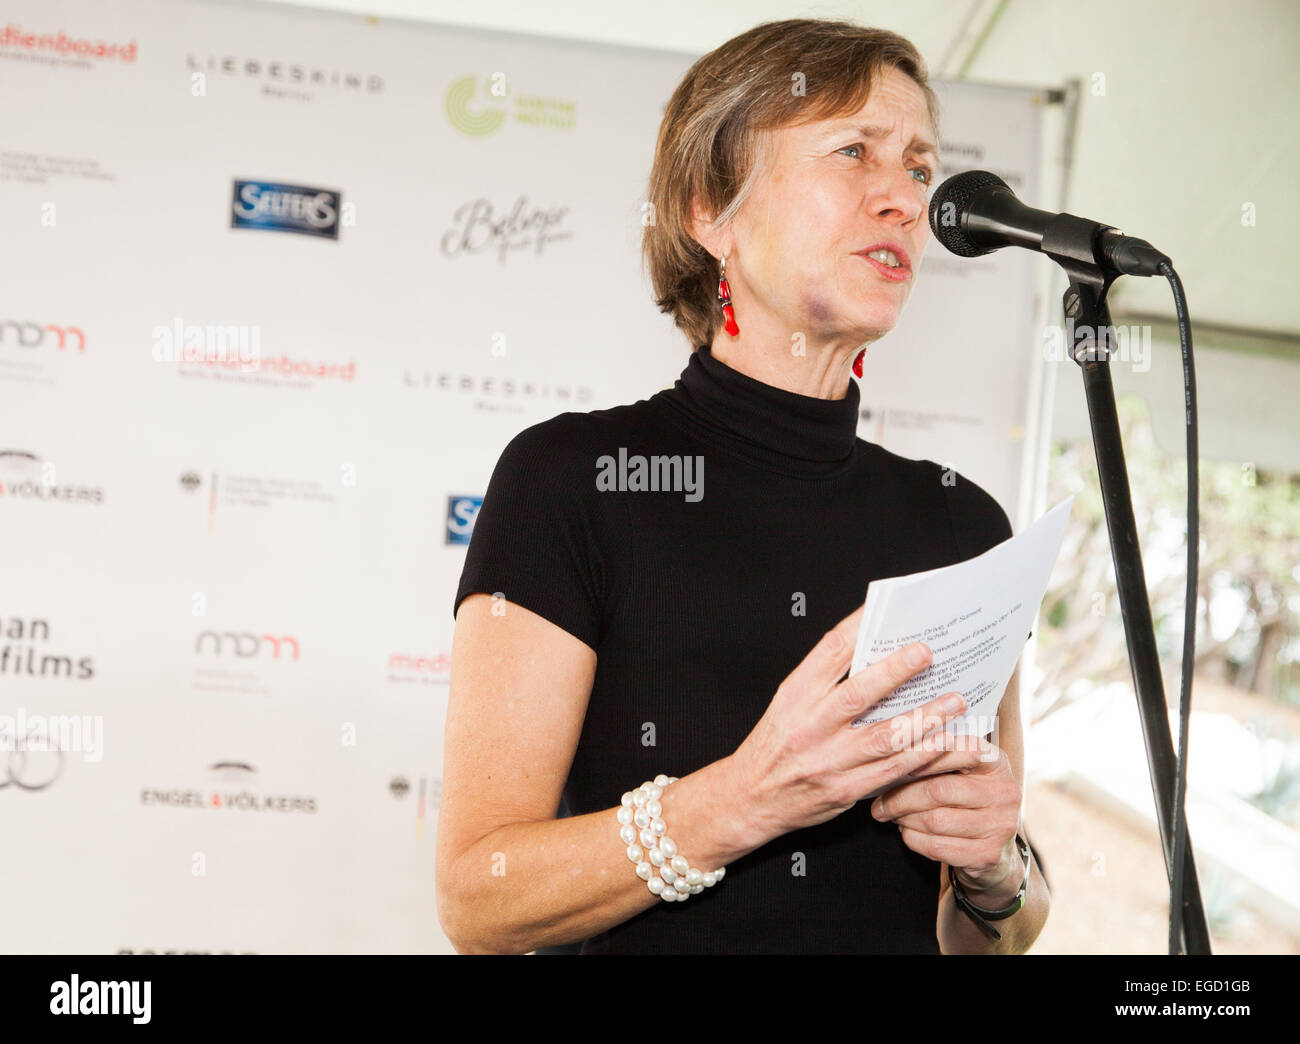 Mariette Rissenbeek at the German Films and the Consulate General of the Federal Republic Of Germany's German Oscar nominees reception held at Villa Aurora in Pacific Palisades on February 21, 2015. Credit: Flaminia Fanale/Lumeimages.com Stock Photo